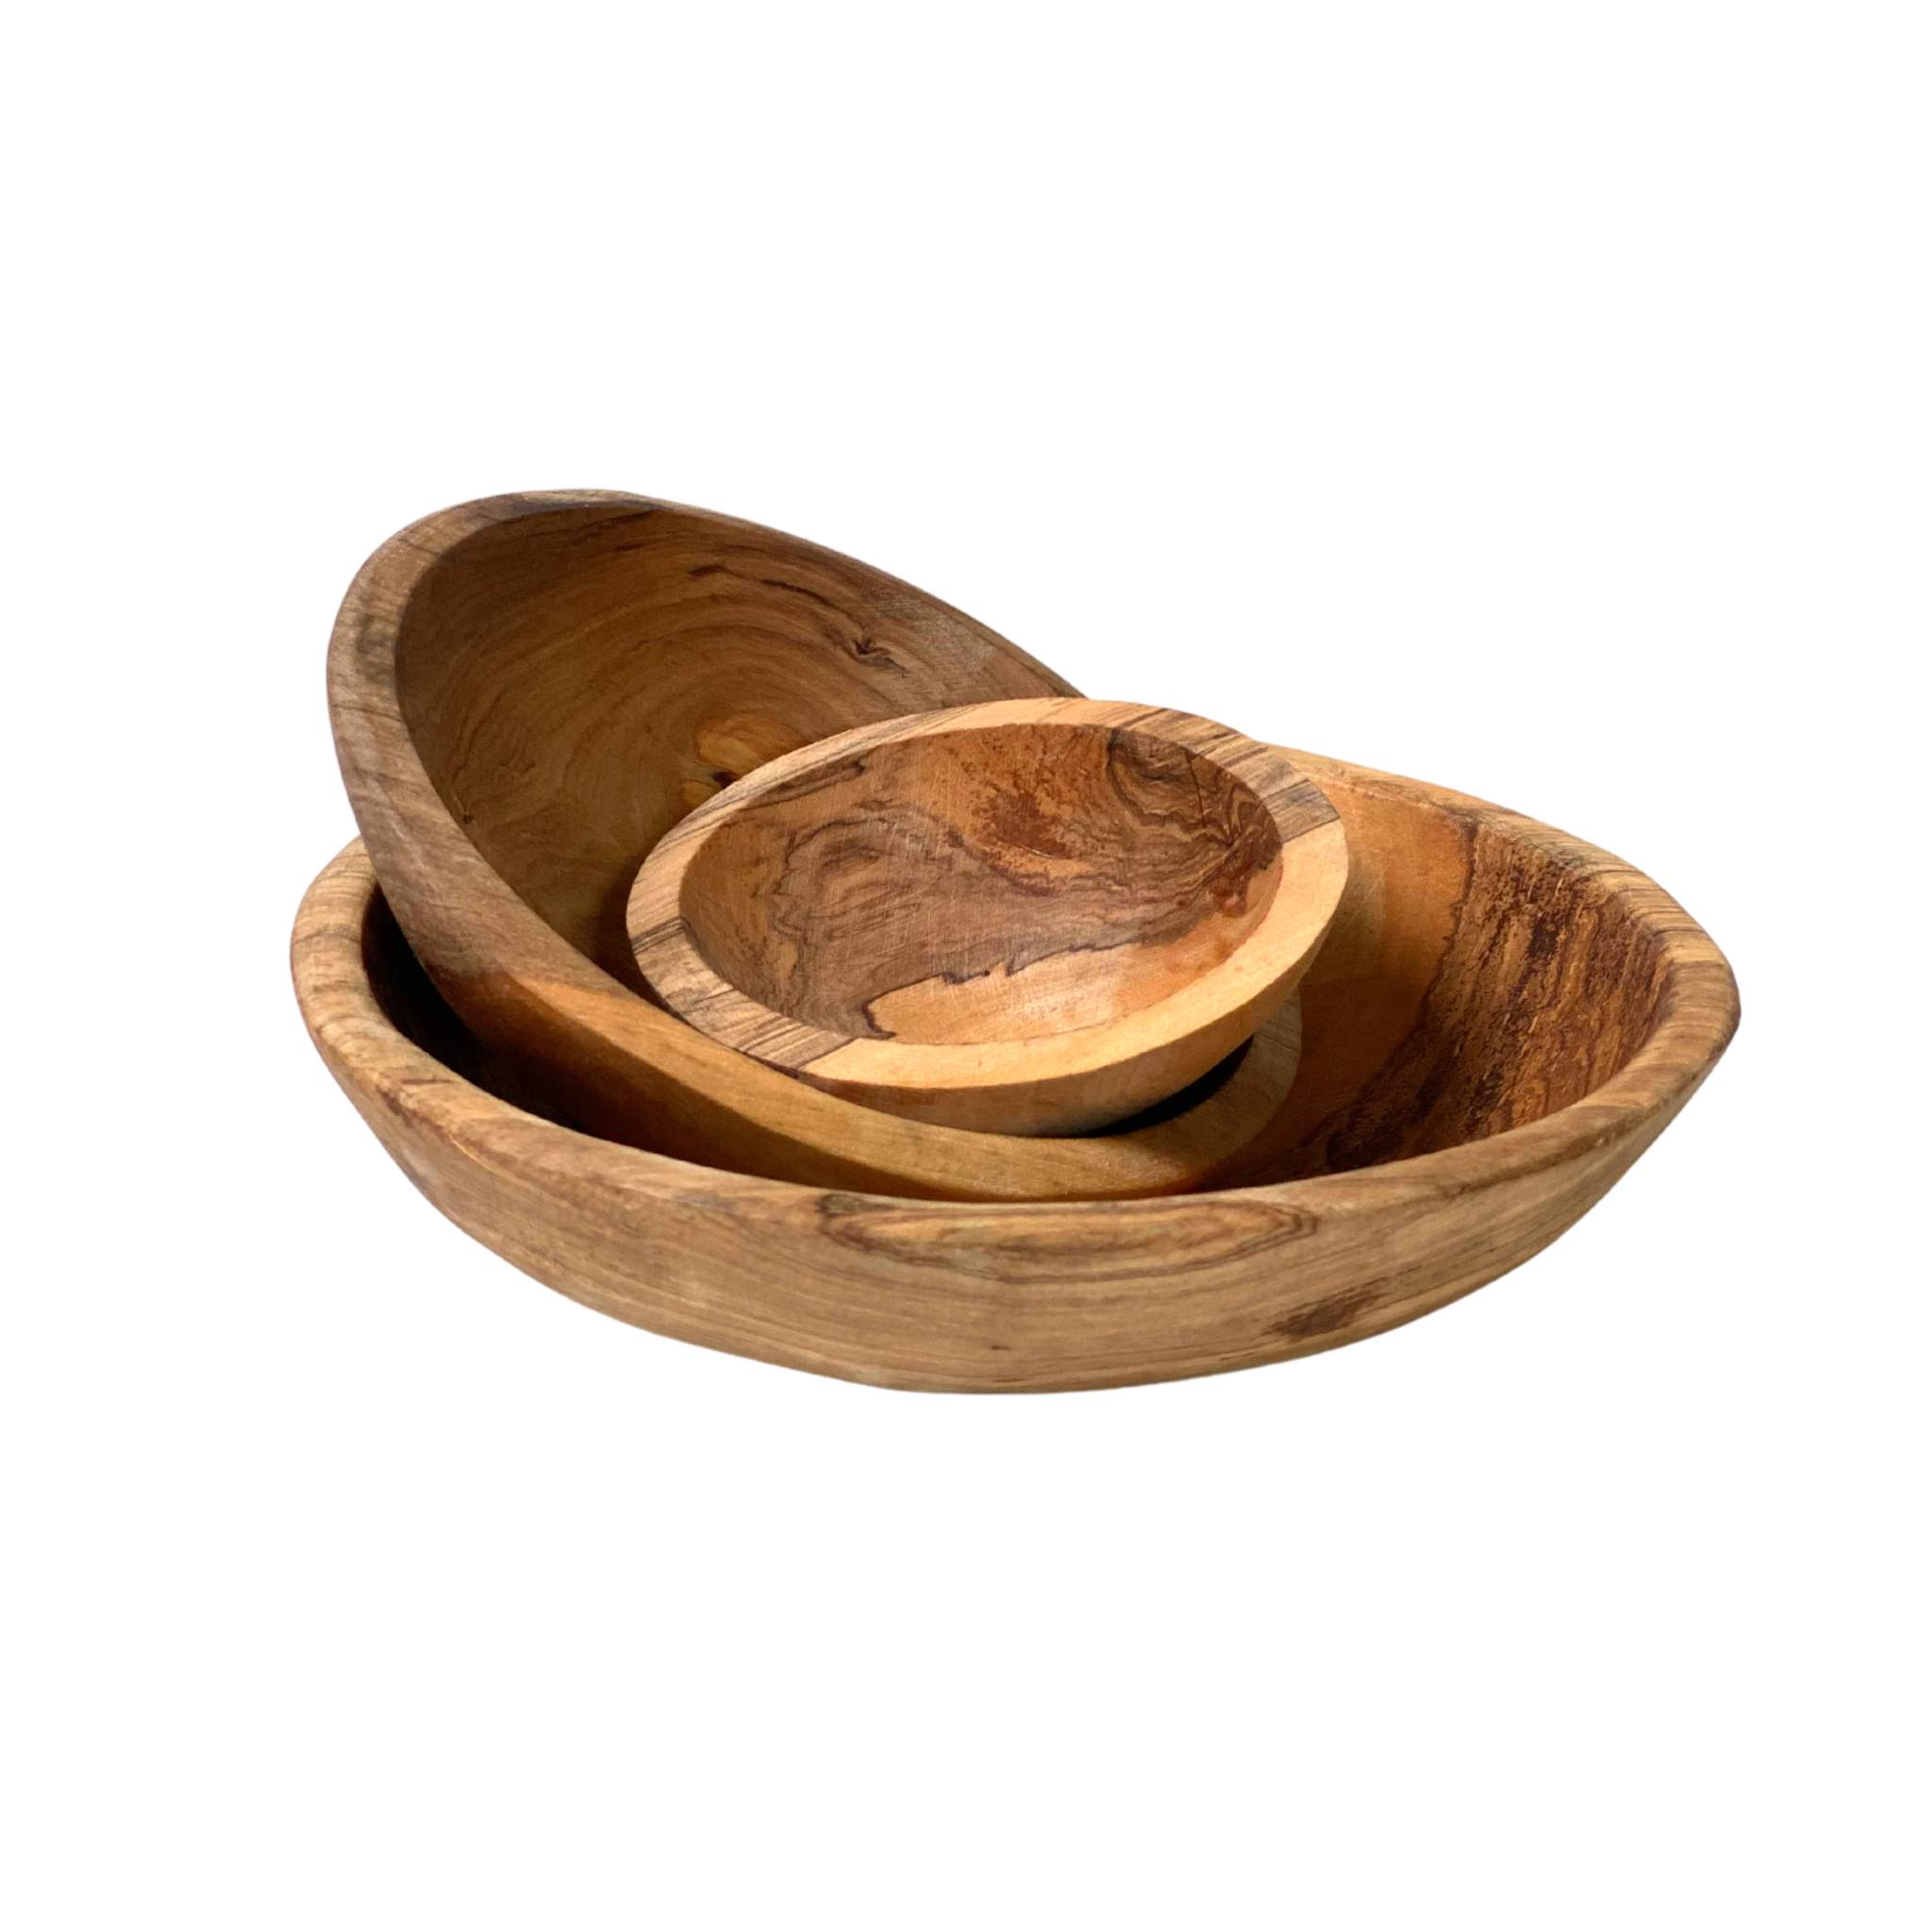 Round olive wood bowl set-Artisan Traders-african,fairtrade,handcrafted,olive wood,wood